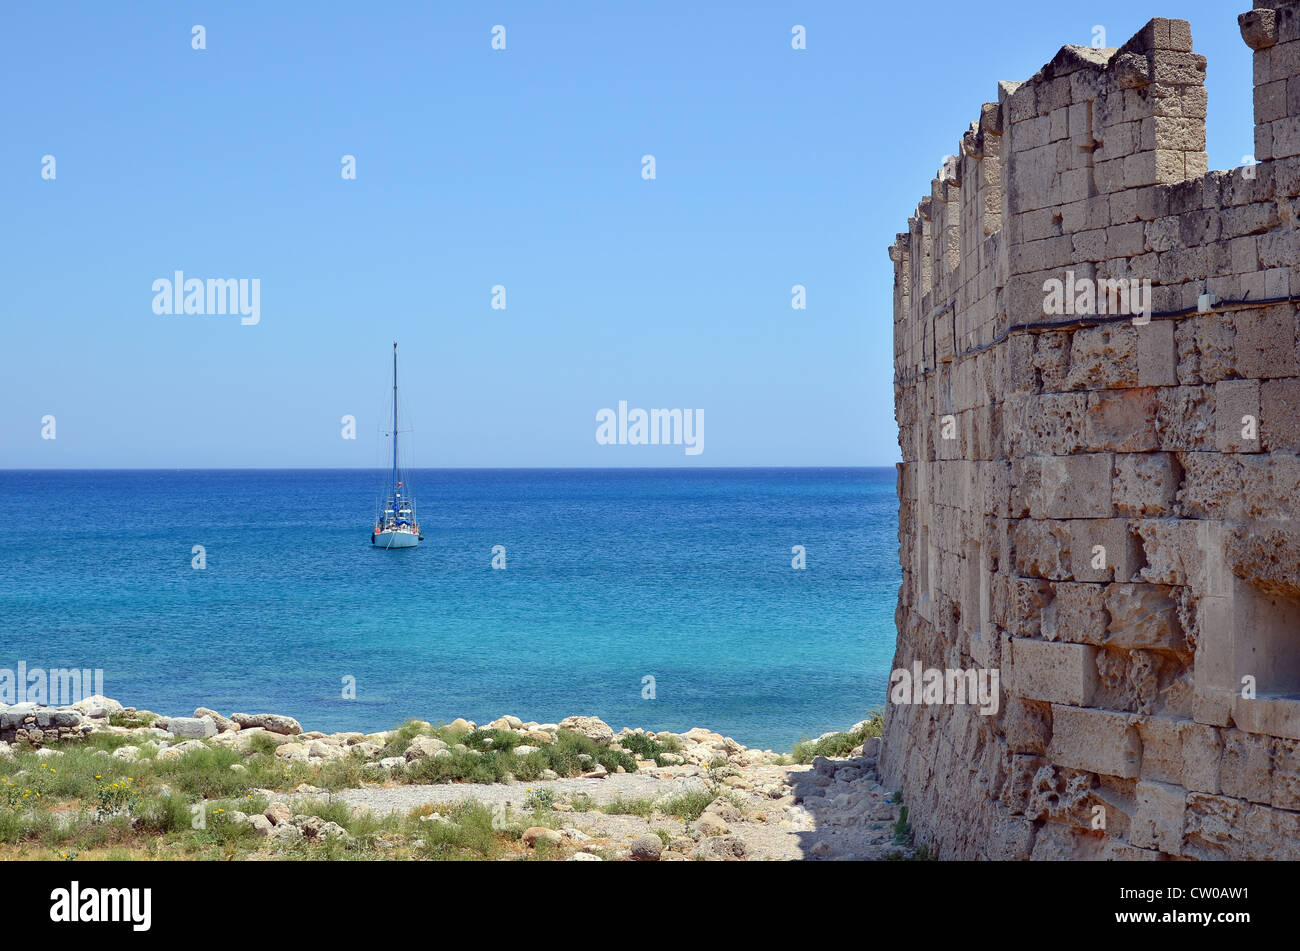 A view out to the Mediterranean sea from beside a fortified wall of the harbour at Rhodes, Greece Stock Photo